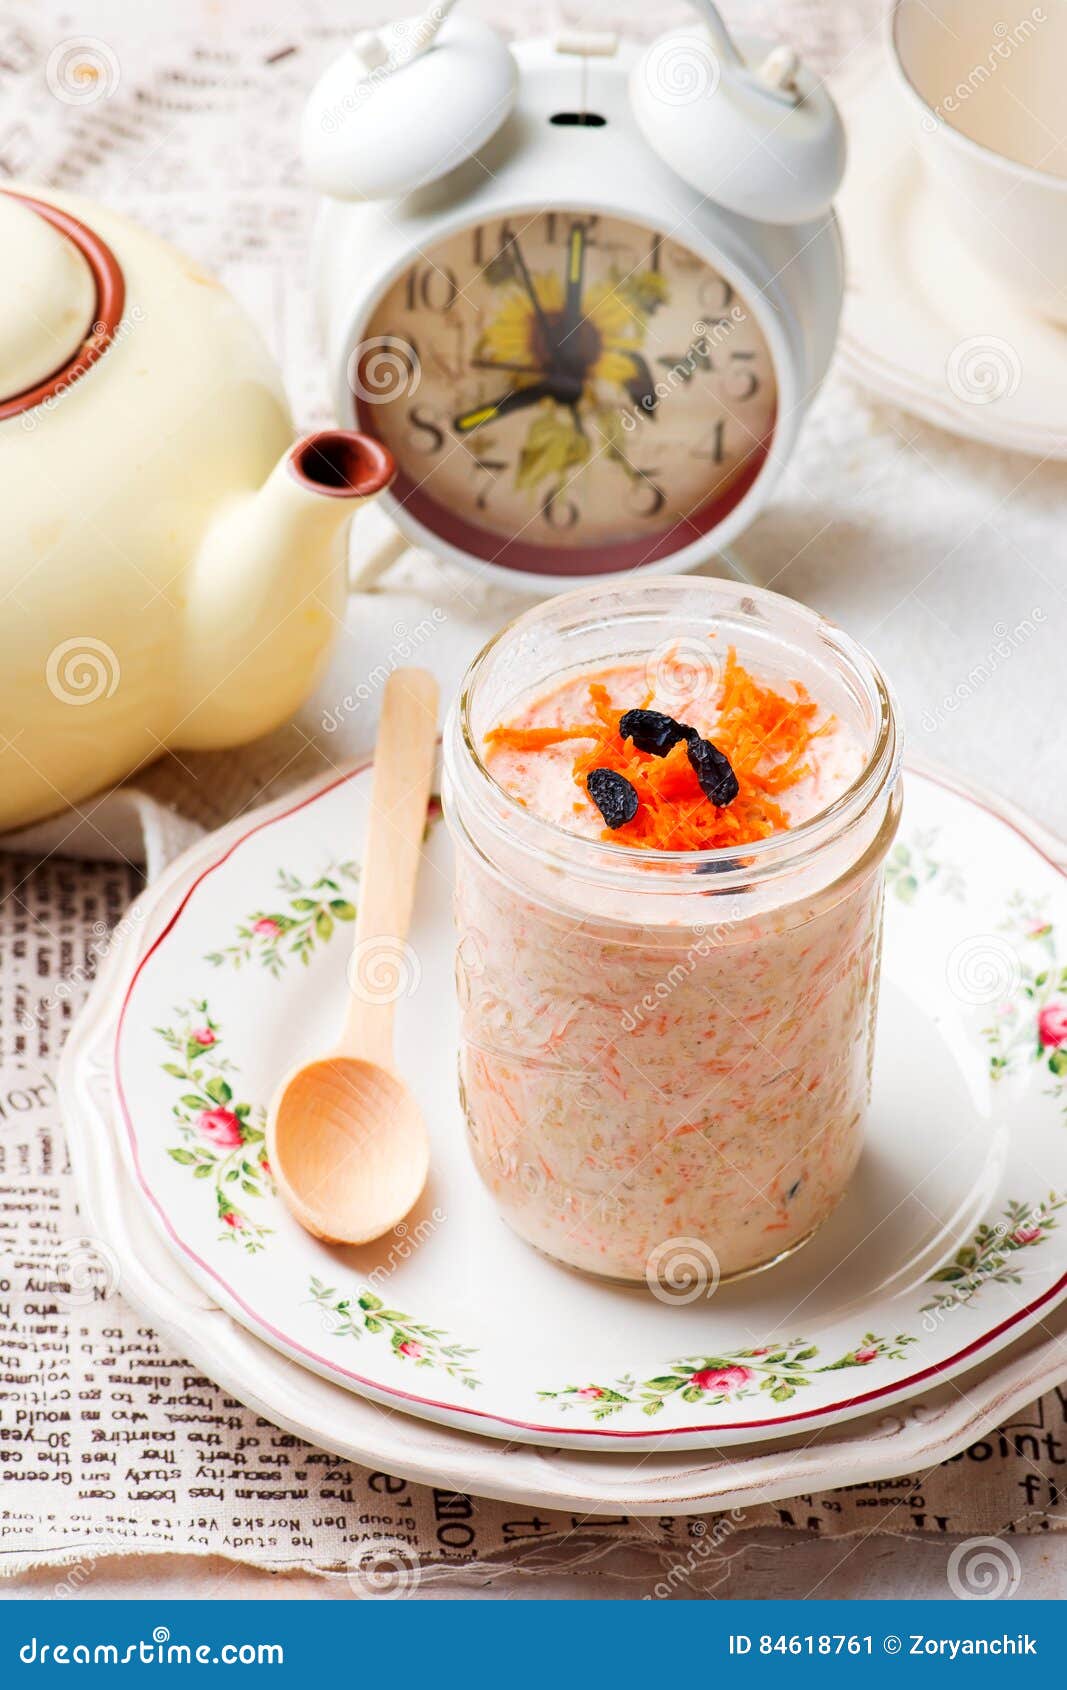 carrot cake overnight oats in to the jar